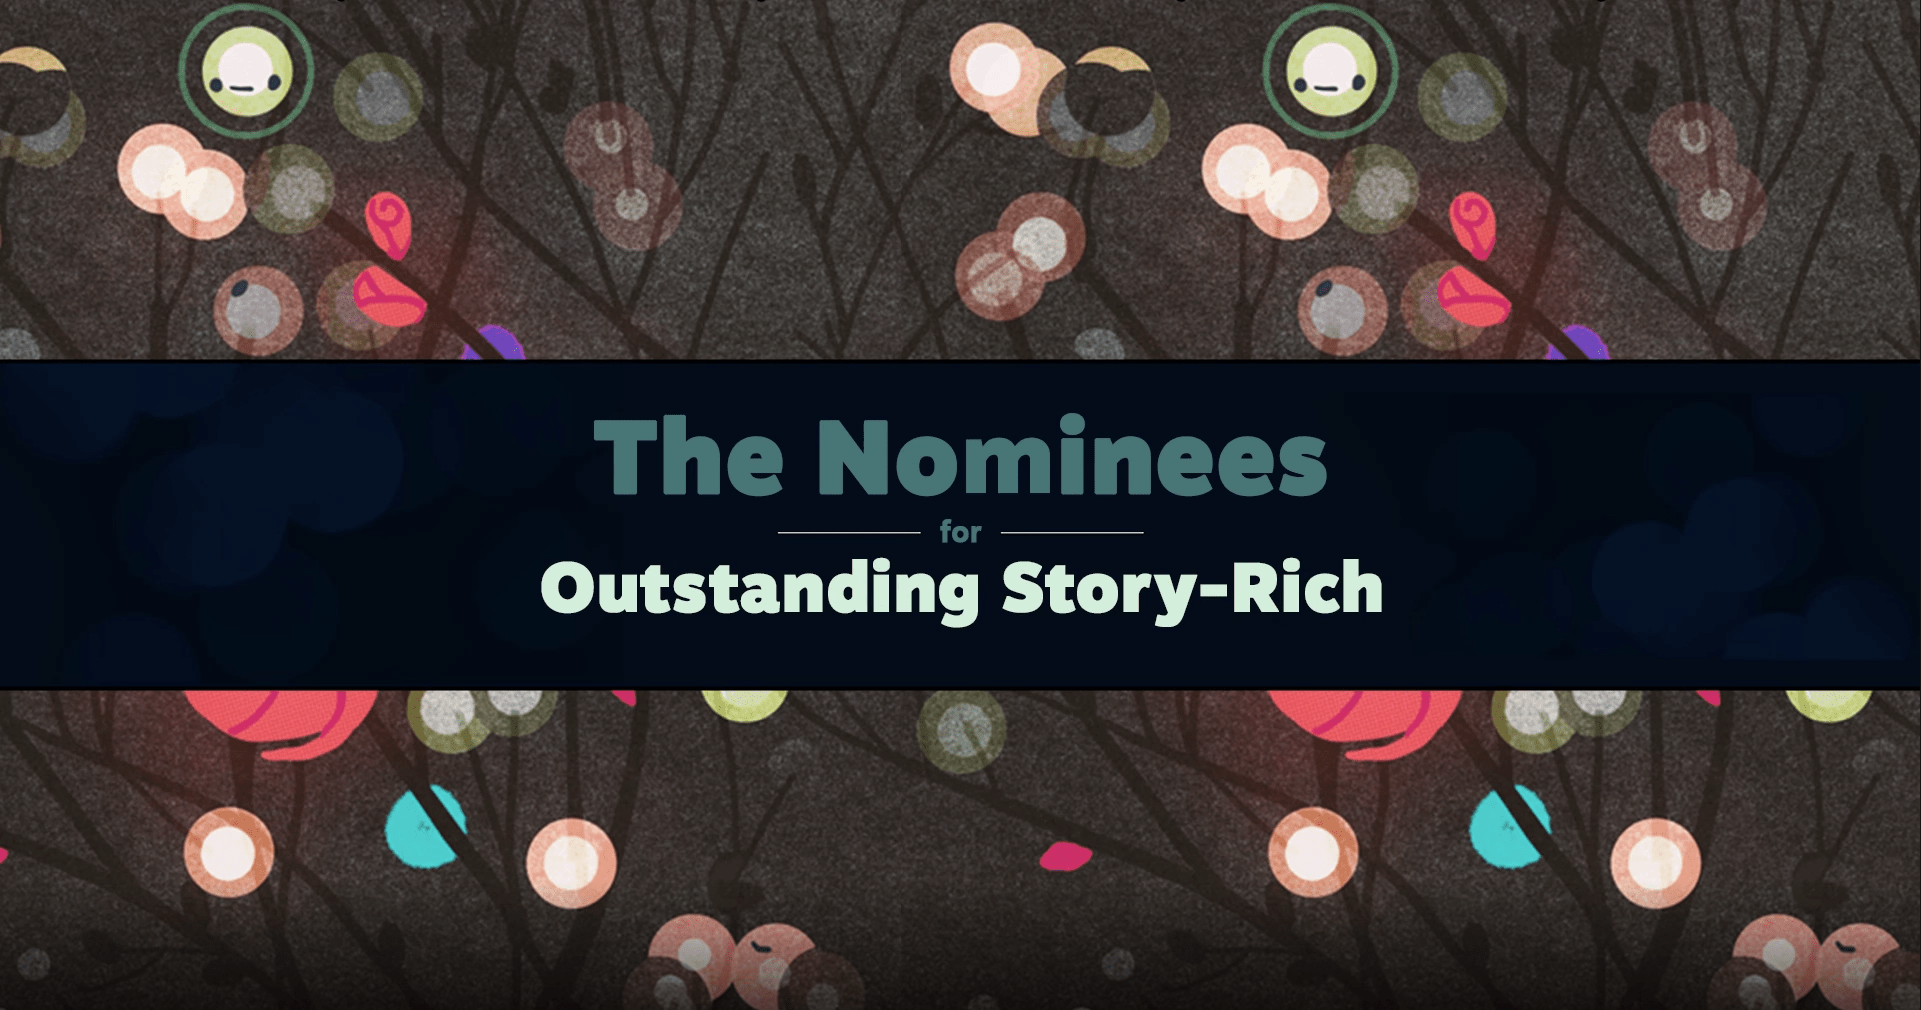 Steam Awards 2019 Fan Voted Nominees Revealed for Category ‘Outstanding Story-Rich Game’